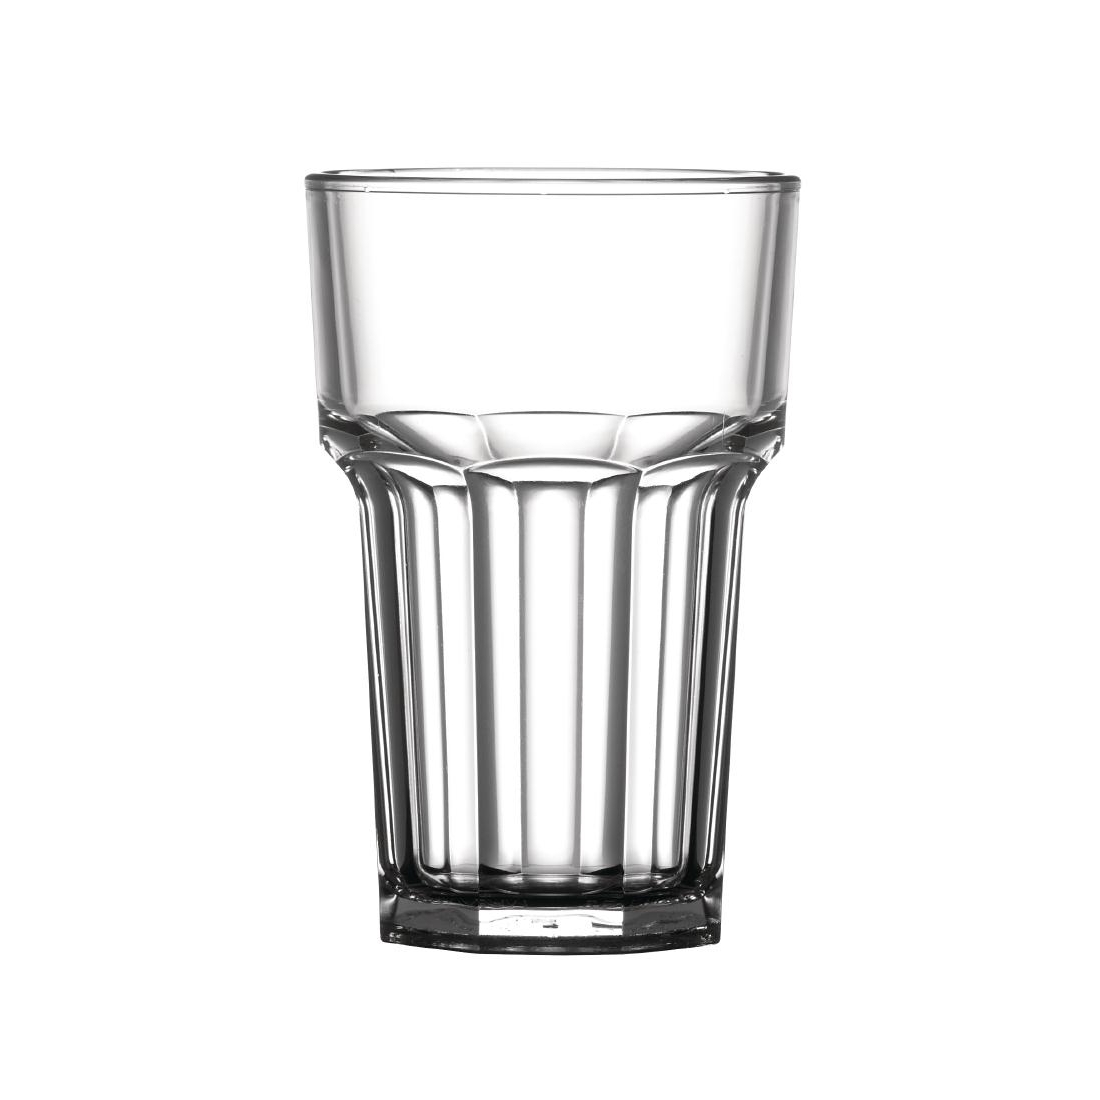 BBP Polycarbonate Nucleated American Highball Glasses Half Pint CE Marked